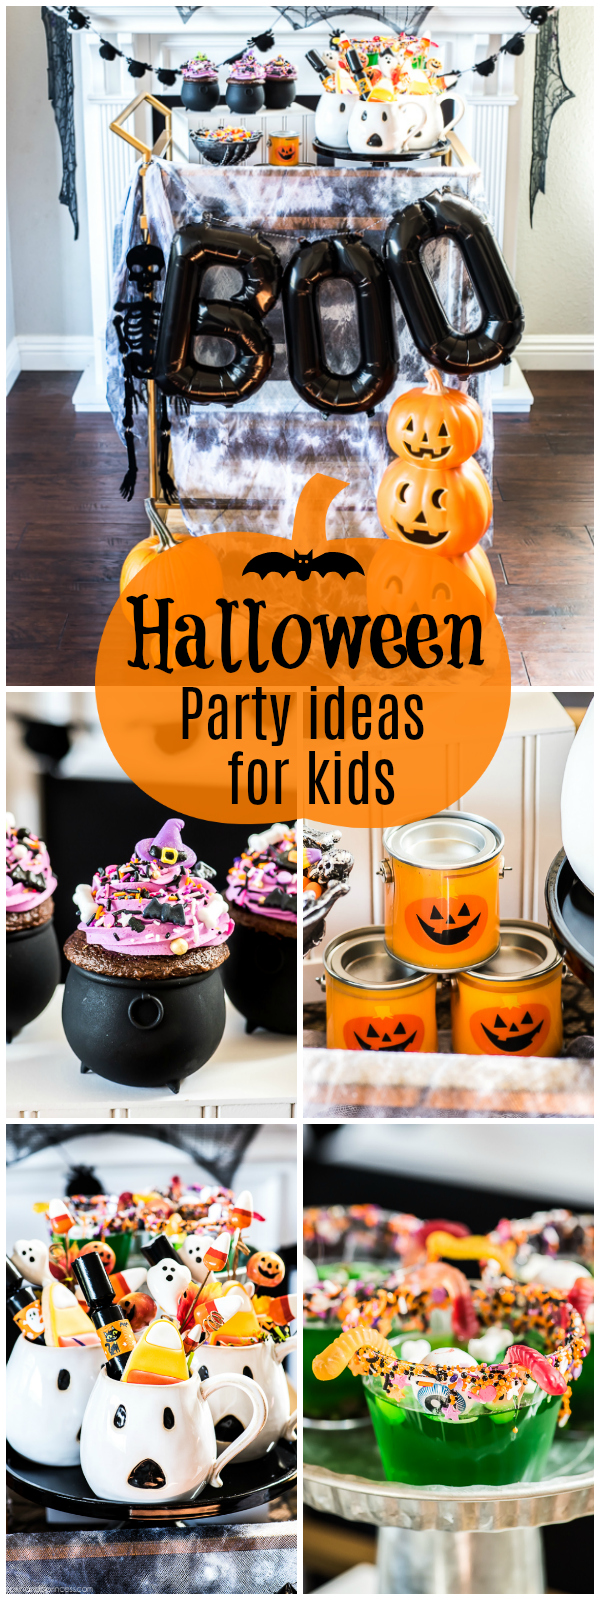 Halloween Party ideas for kids